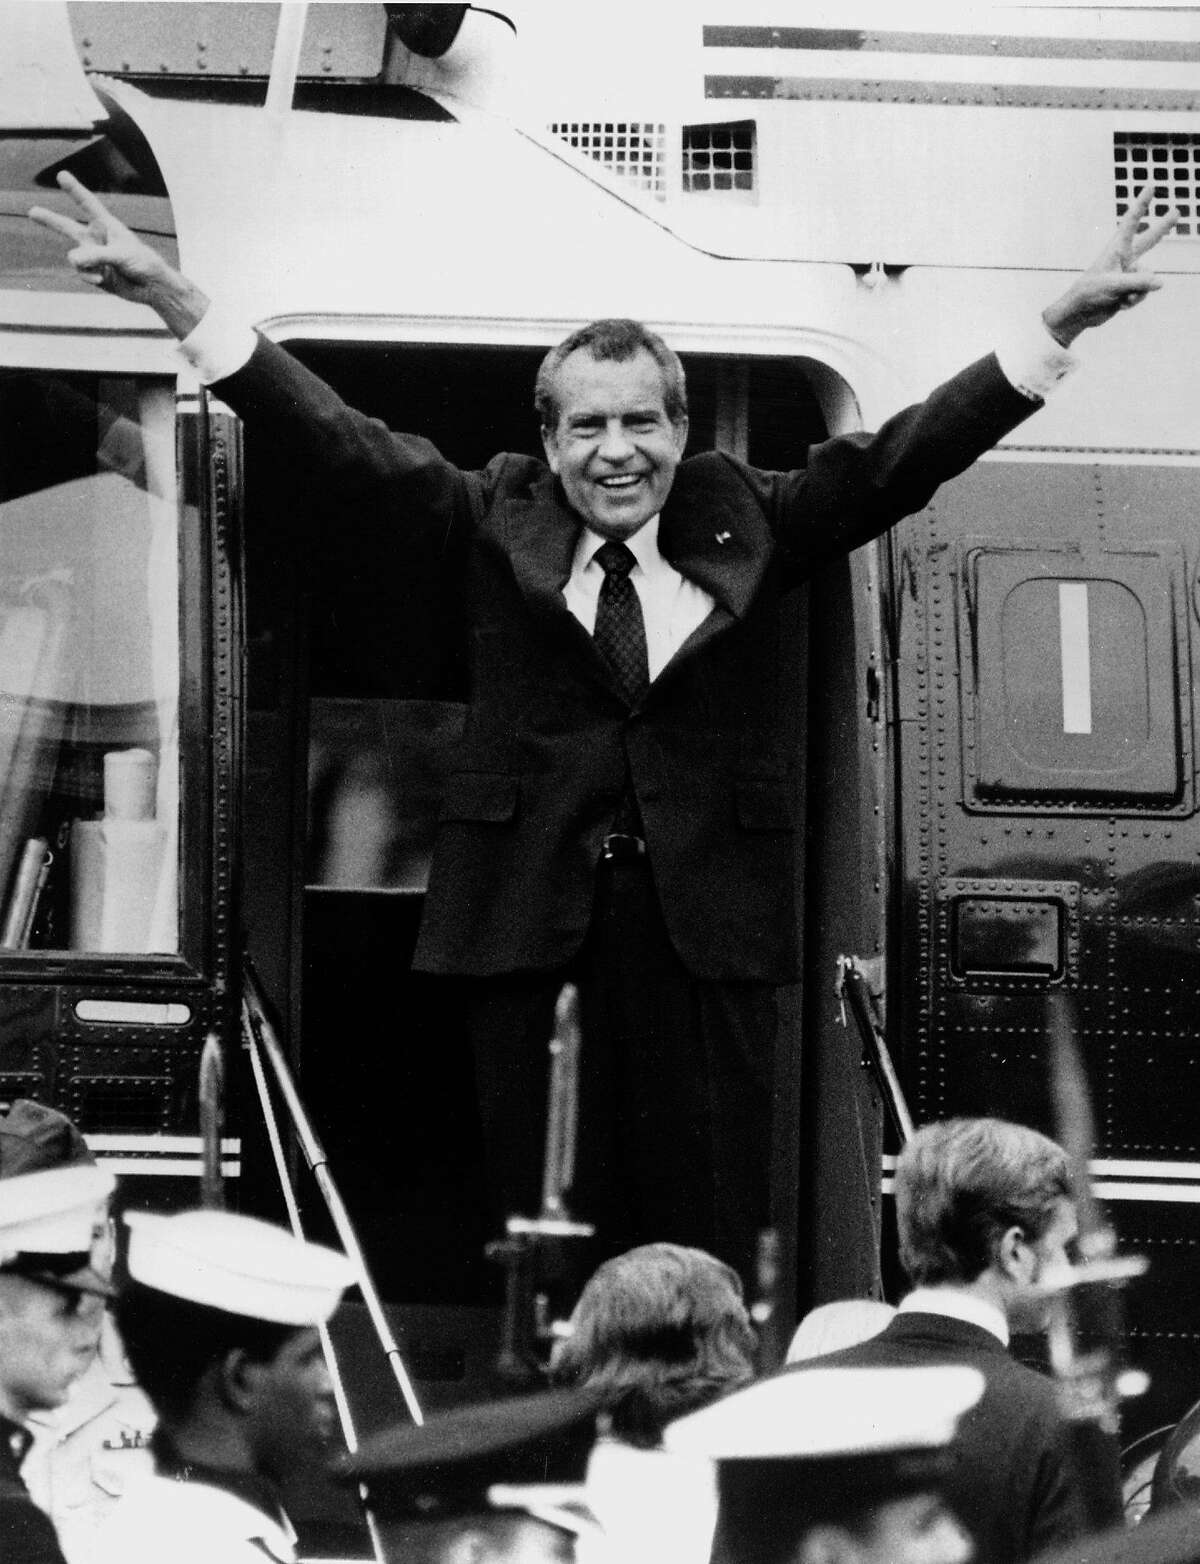 Richard Nixon says goodbye with a victorious salute to his staff members outside the White House as he boards a helicopter after resigning the presidency on Aug. 9, 1974.